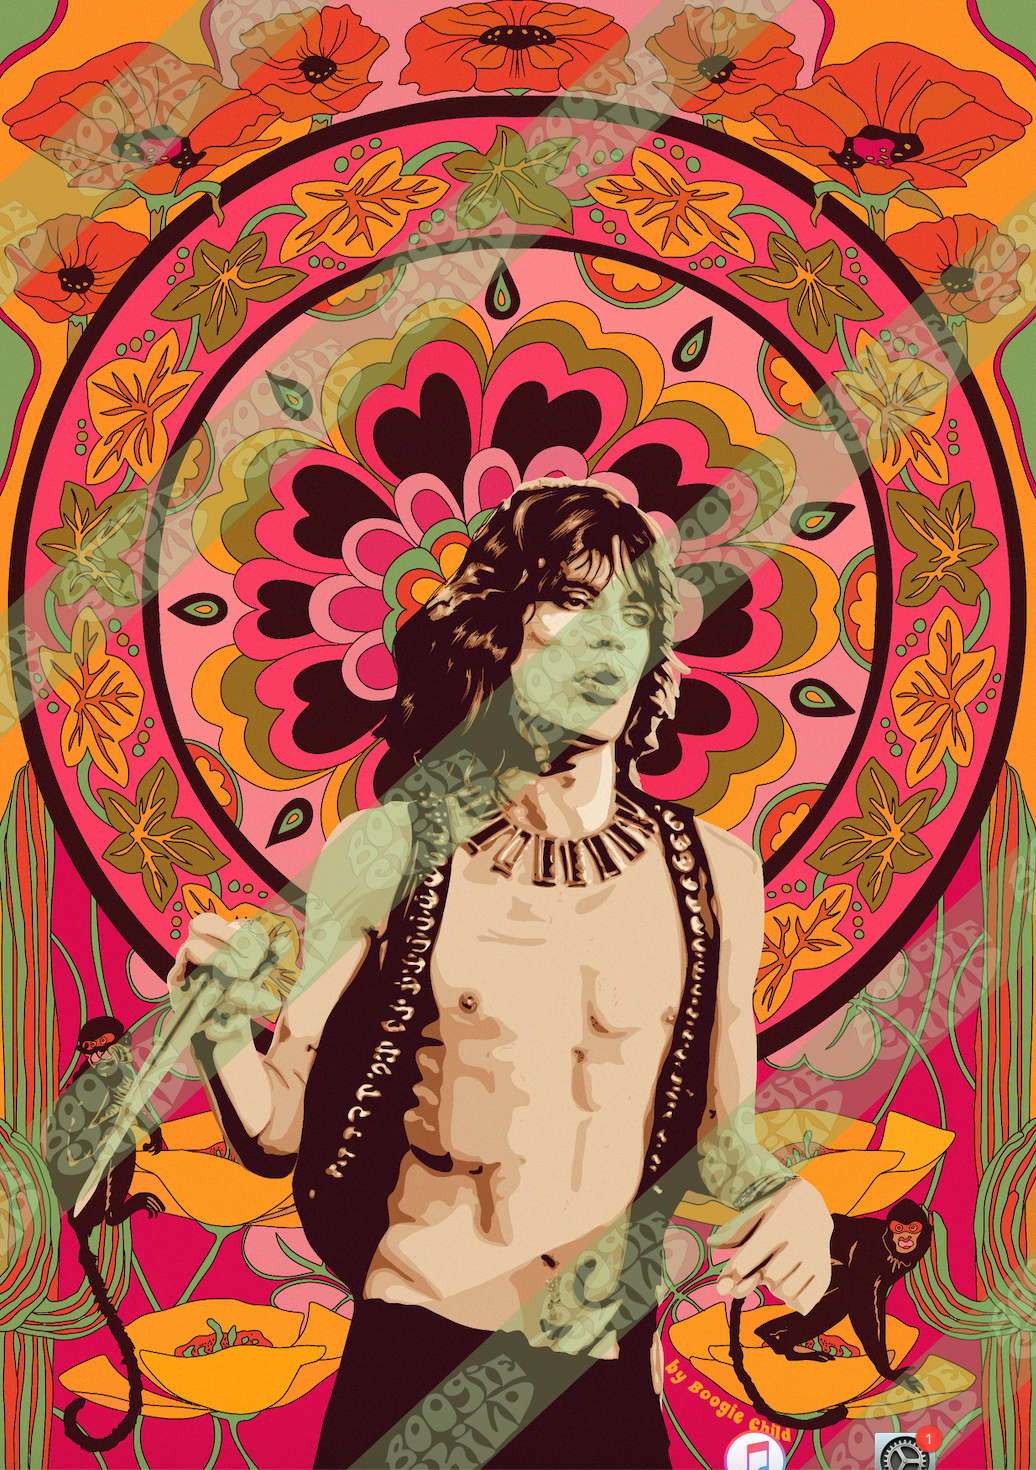 The Mick Jagger Print - Size A3 / 11.7" × 16.5"